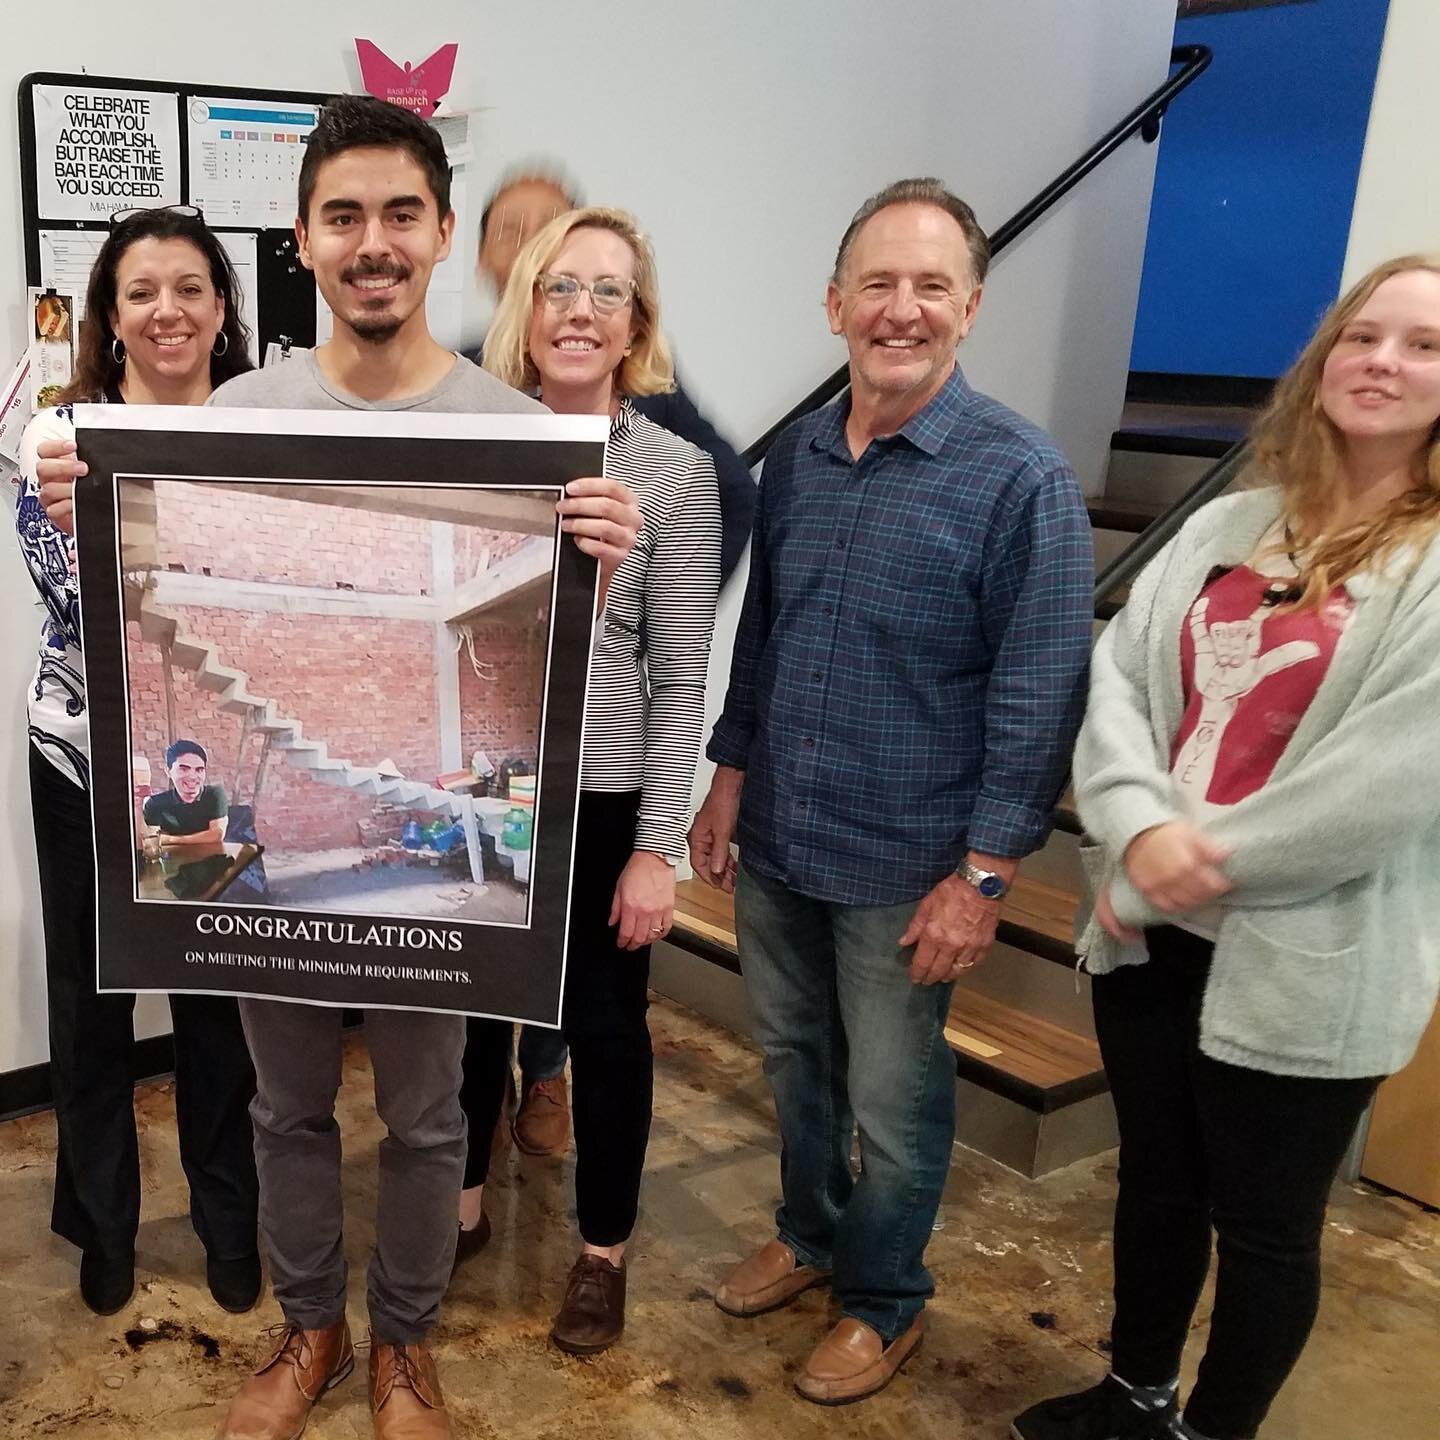 Congratulations to our newest ARCHITECT, Joel Lazaro! All of #teamdavy is so proud of you and all your hard work! 
For those of you who want to know what the poster says, it reads &ldquo;congratulations on meeting the minimum requirements.&rdquo; 😂 